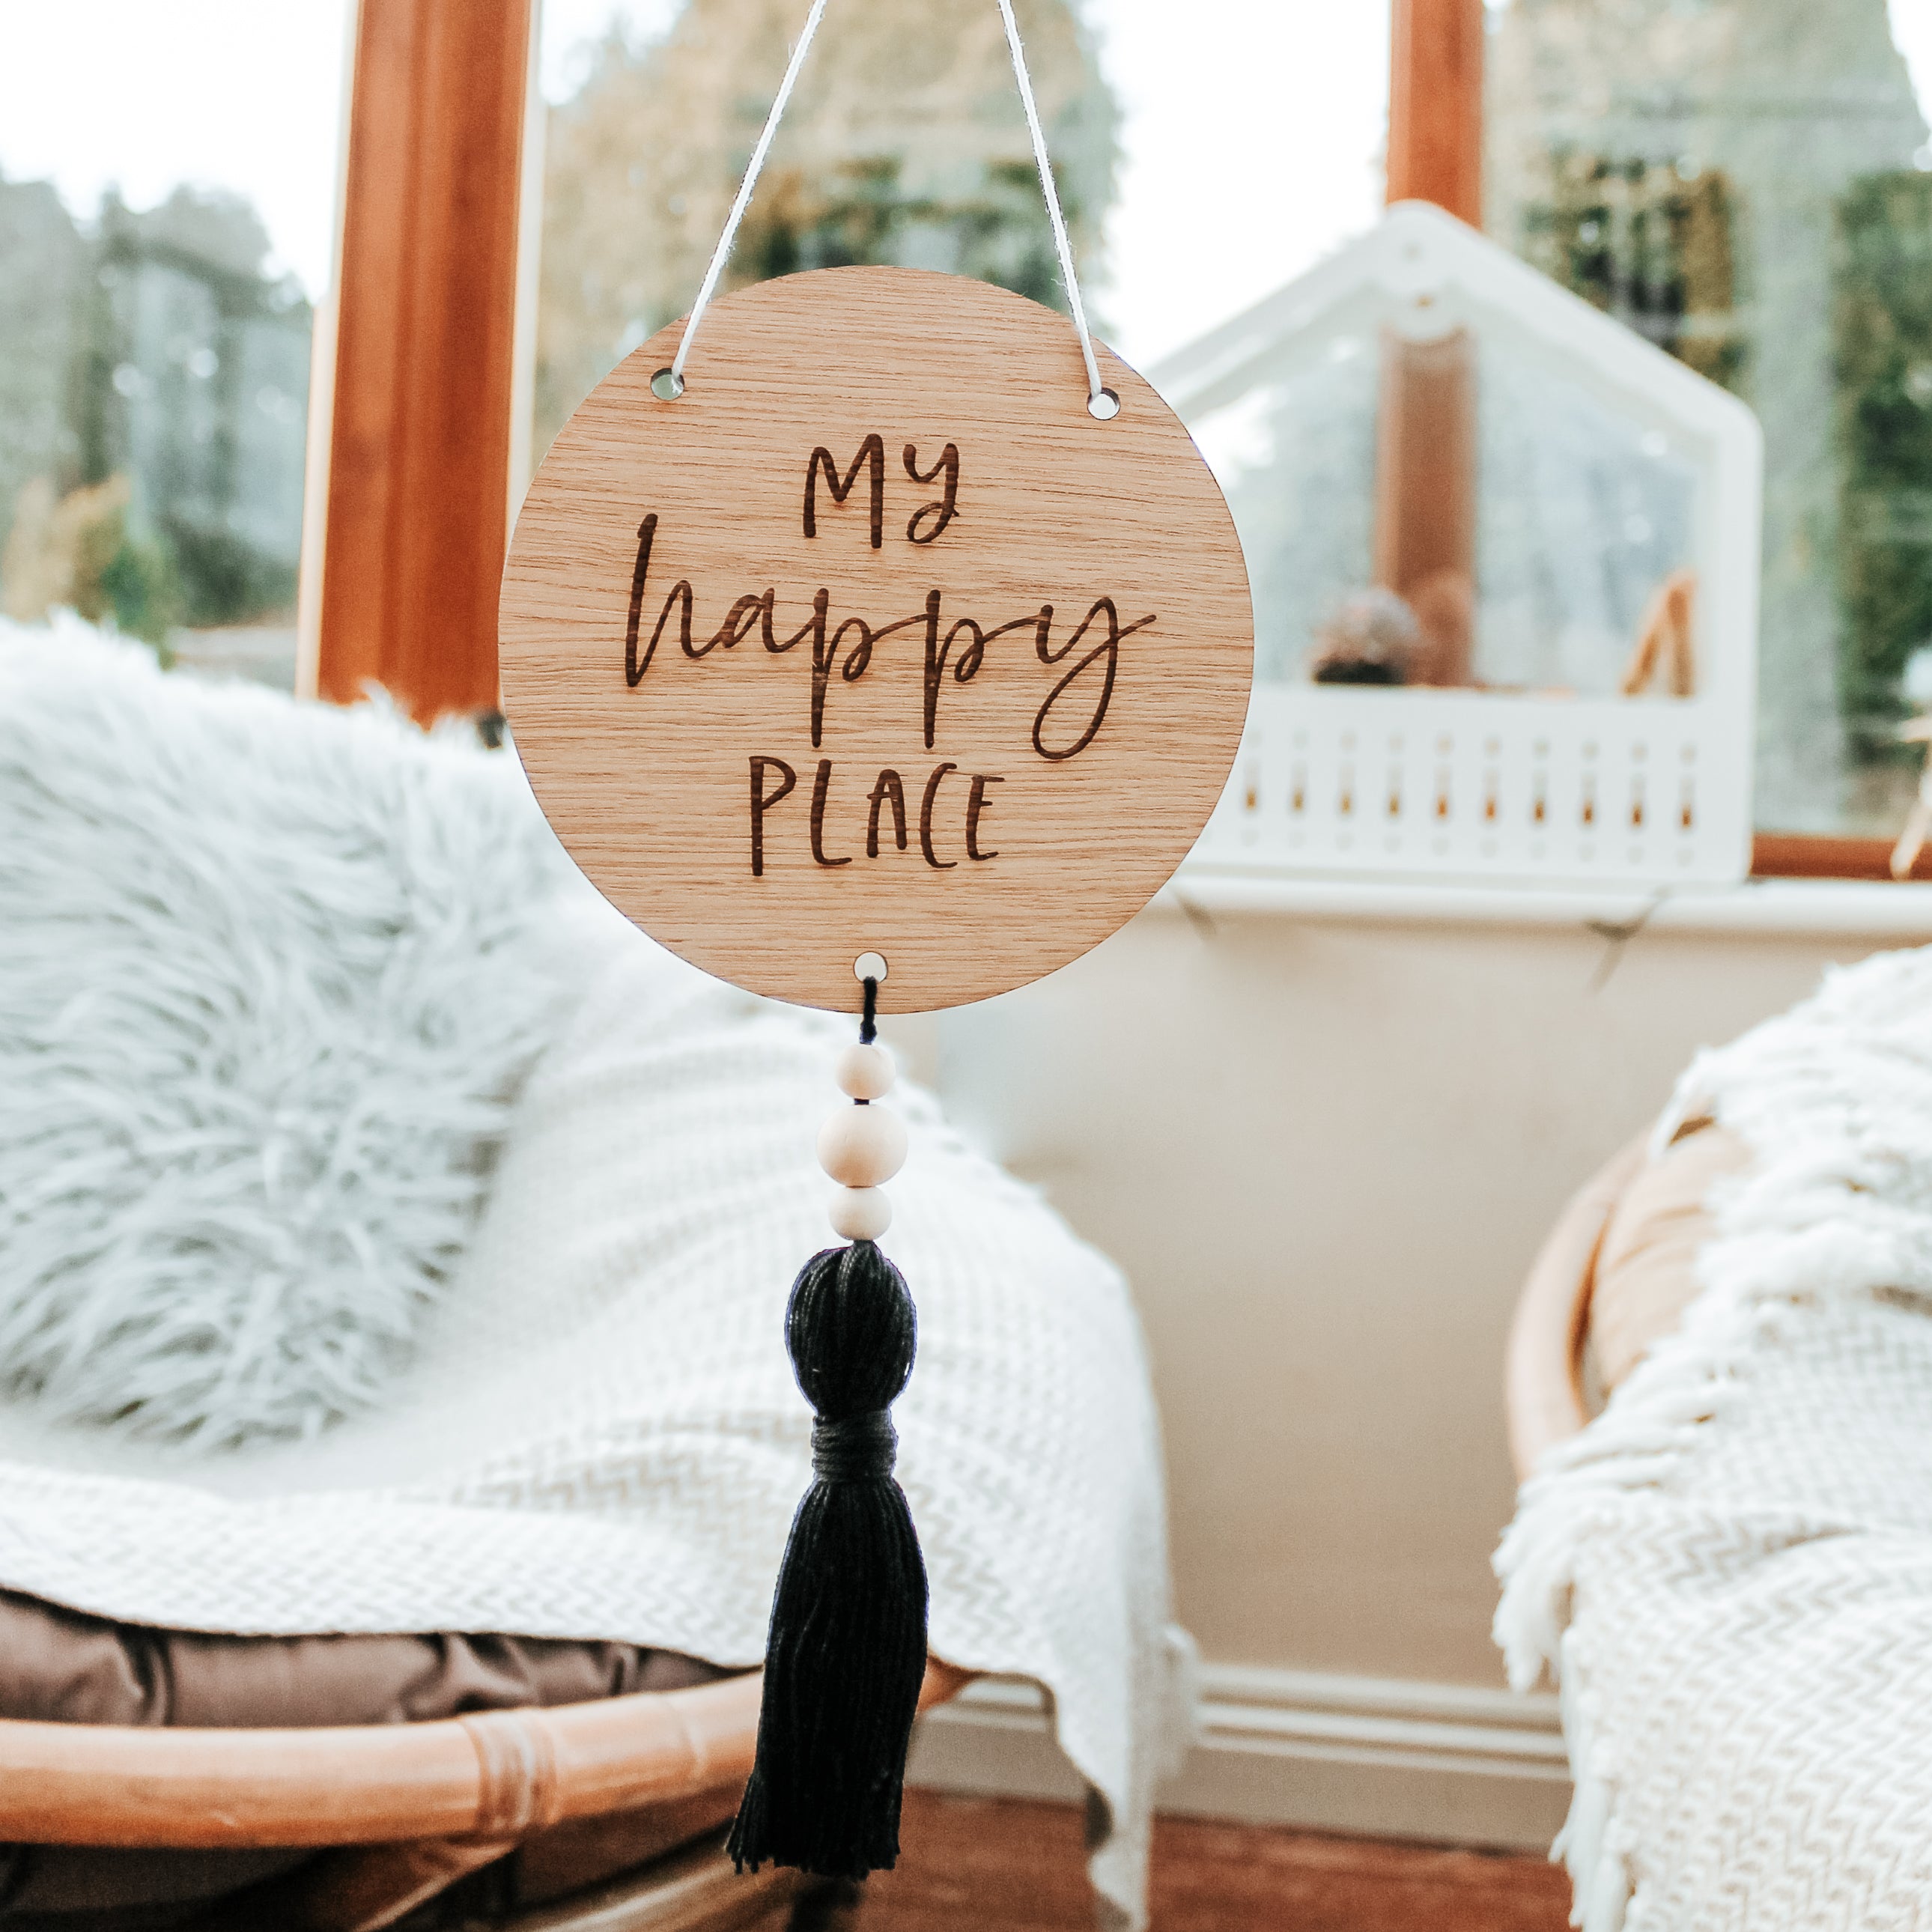 My Happy Place - Craft Room Round Wooden Sign With Tassel